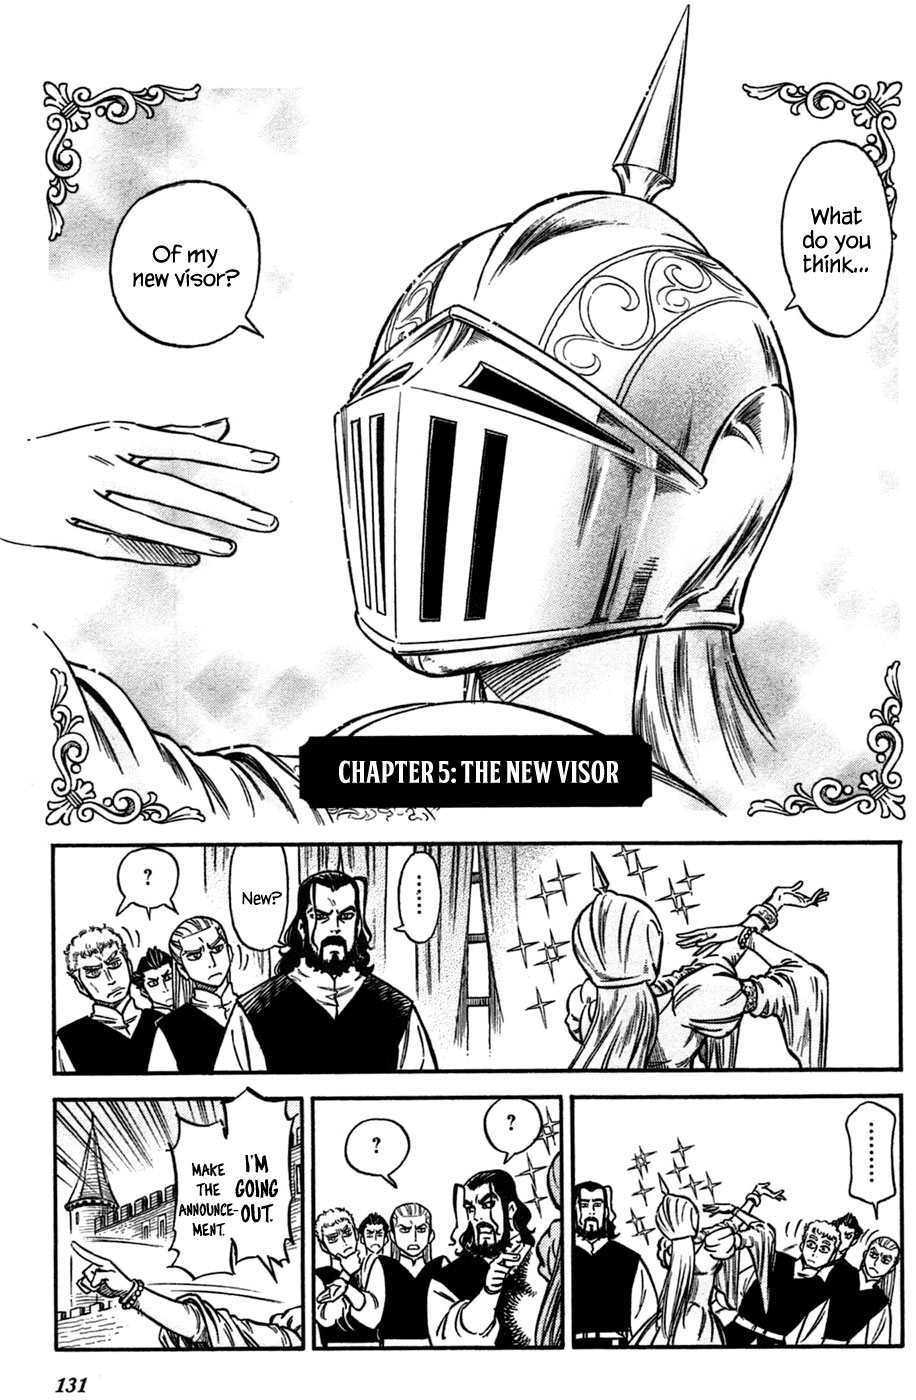 Stravaganza - Isai No Hime Vol.1 Chapter 5: The New Visor - Picture 3